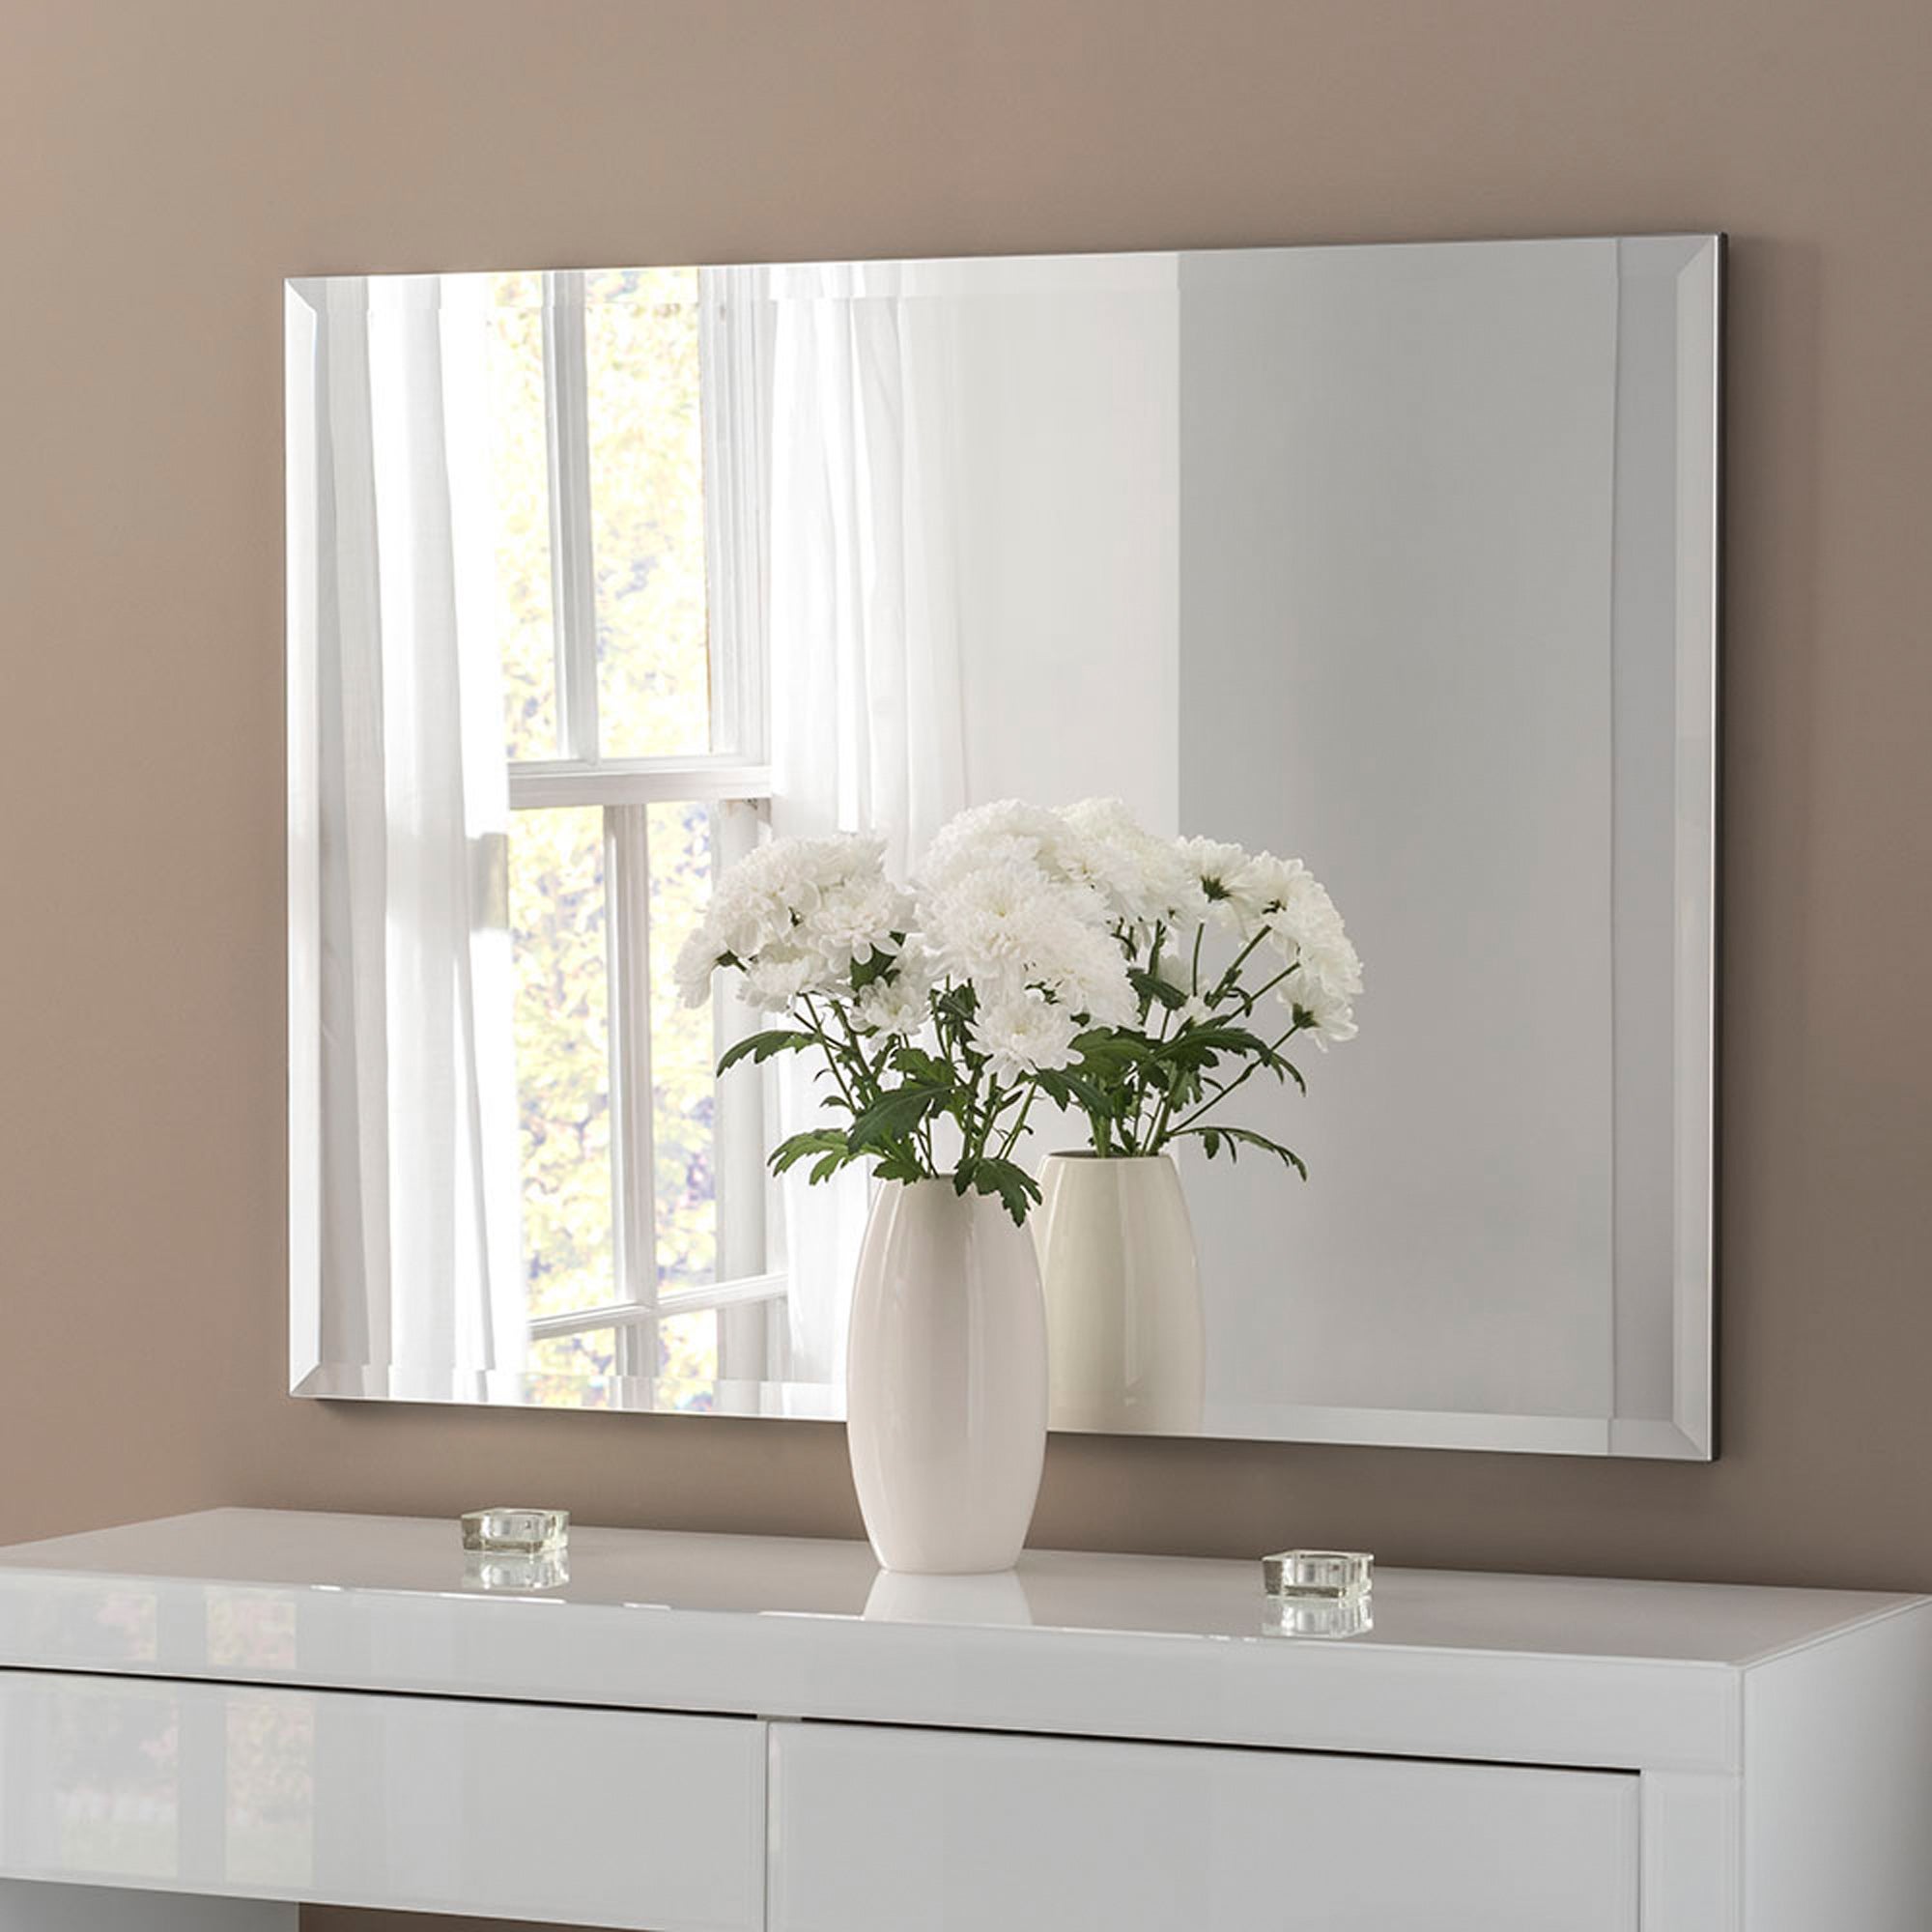 Yearn Bevelled Rectangle Overmantel Wall Mirror Dunelm 